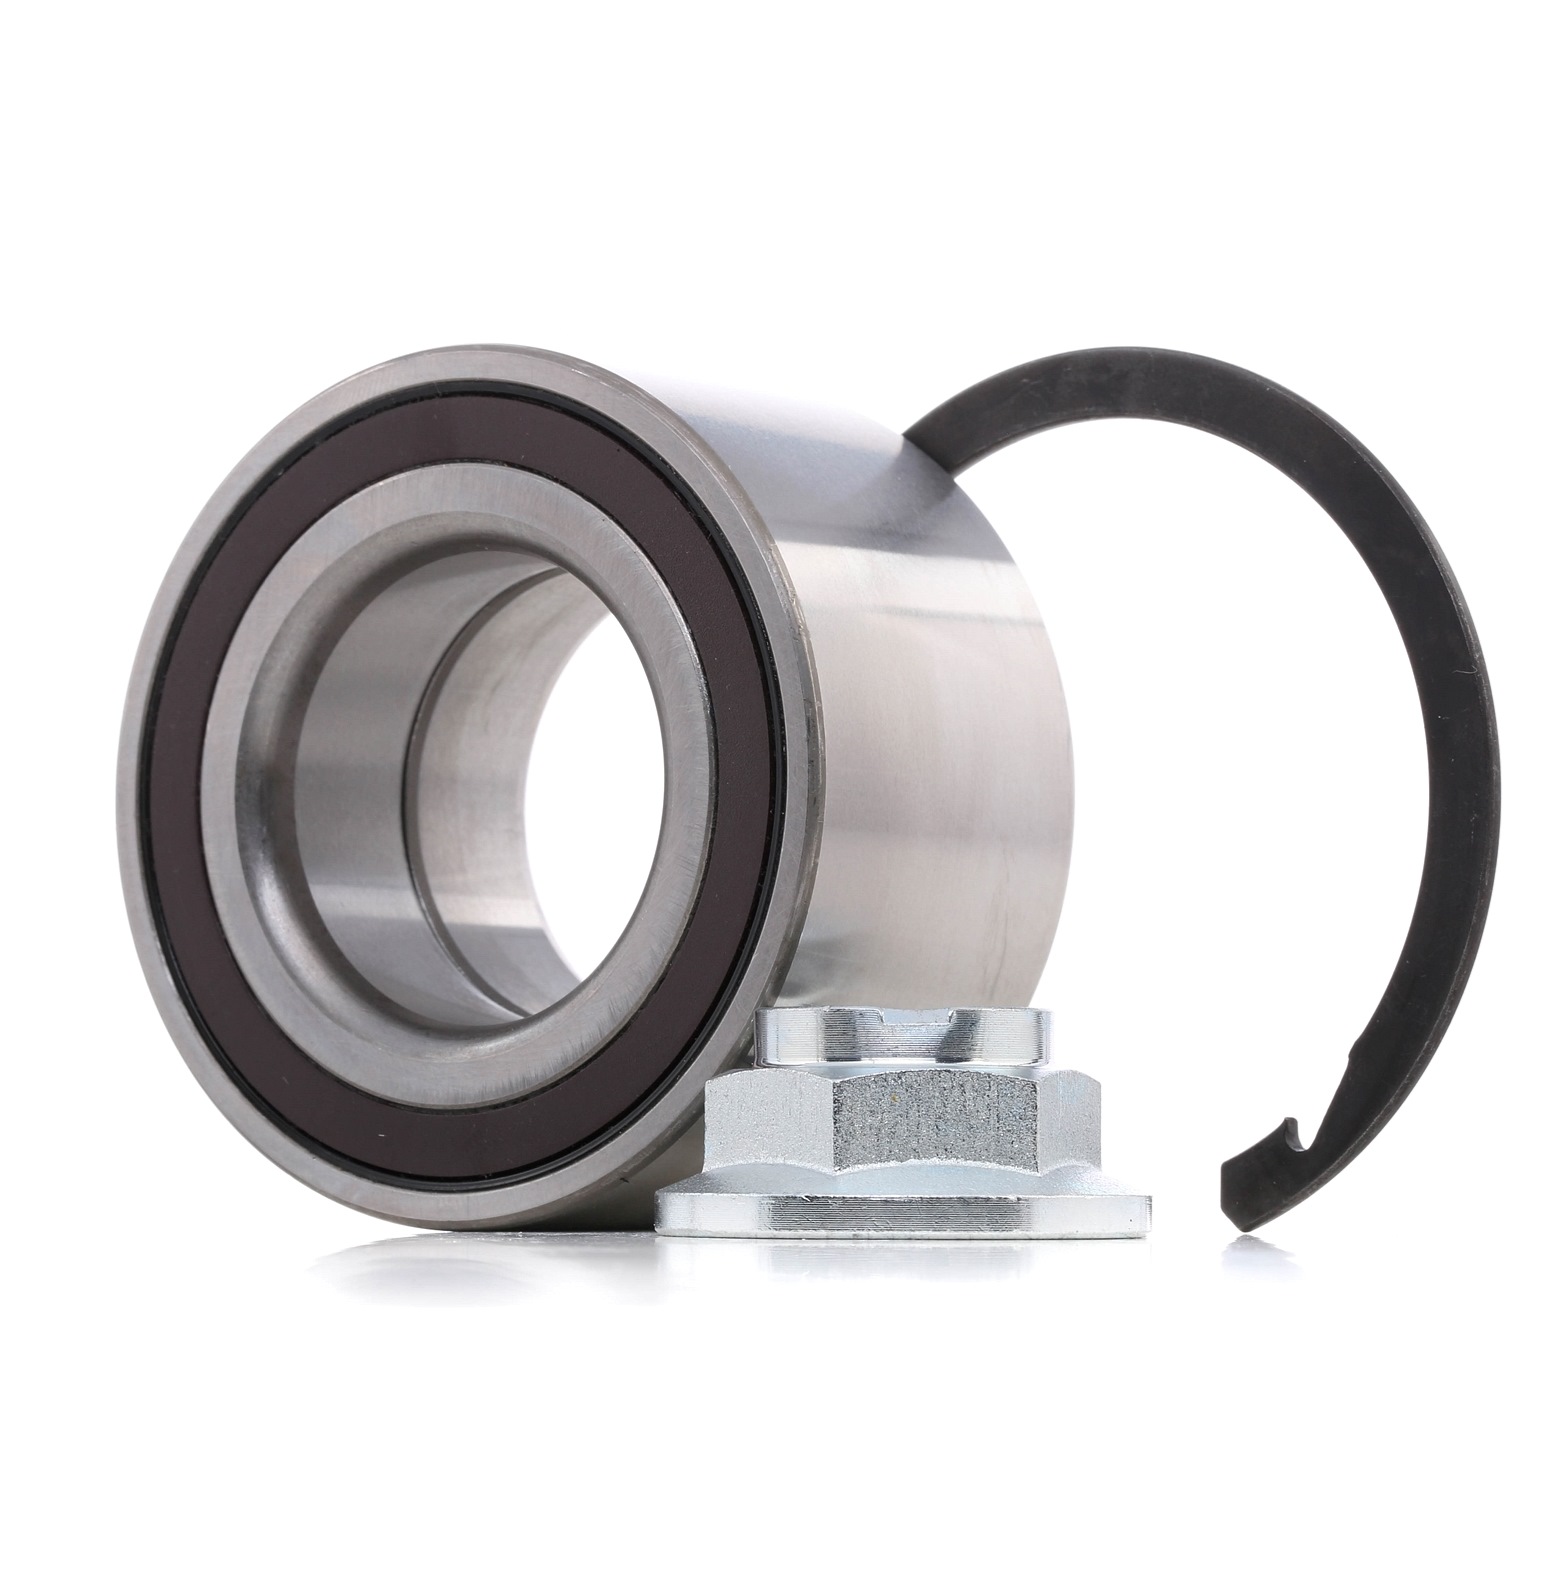 STARK SKWB-0180259 Wheel bearing kit Front Axle, Left, Right, with integrated magnetic sensor ring, 84 mm